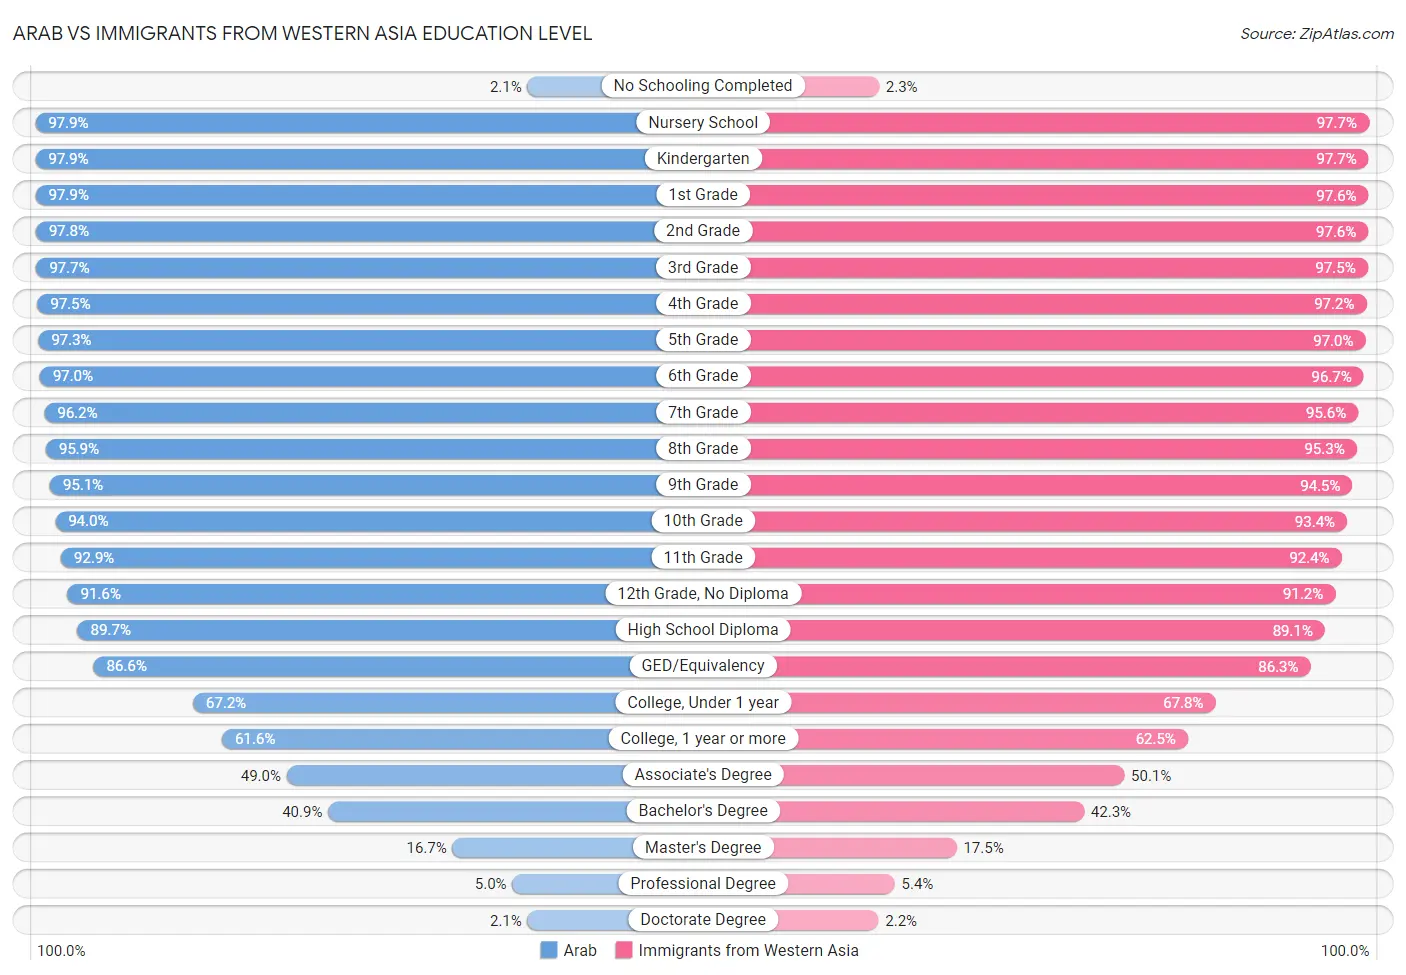 Arab vs Immigrants from Western Asia Education Level